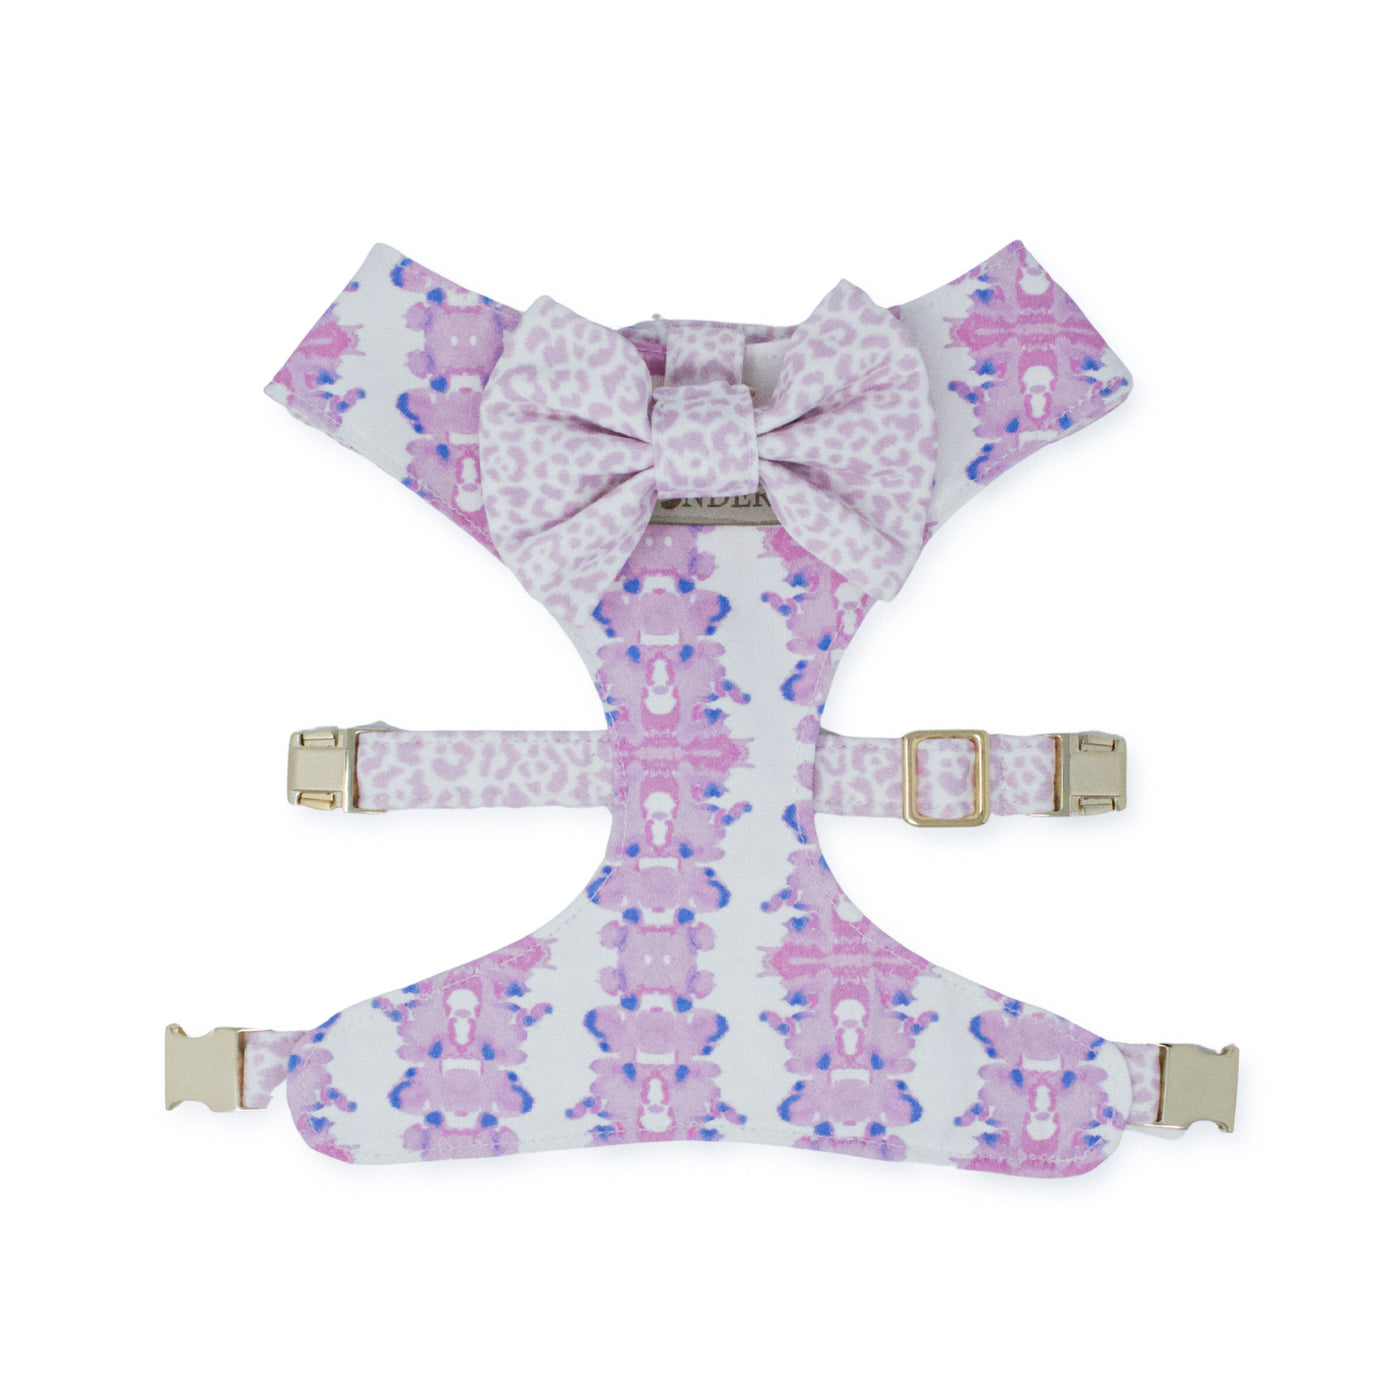 French Lavender Reversible Dog Harness + Rosette Bow Tie